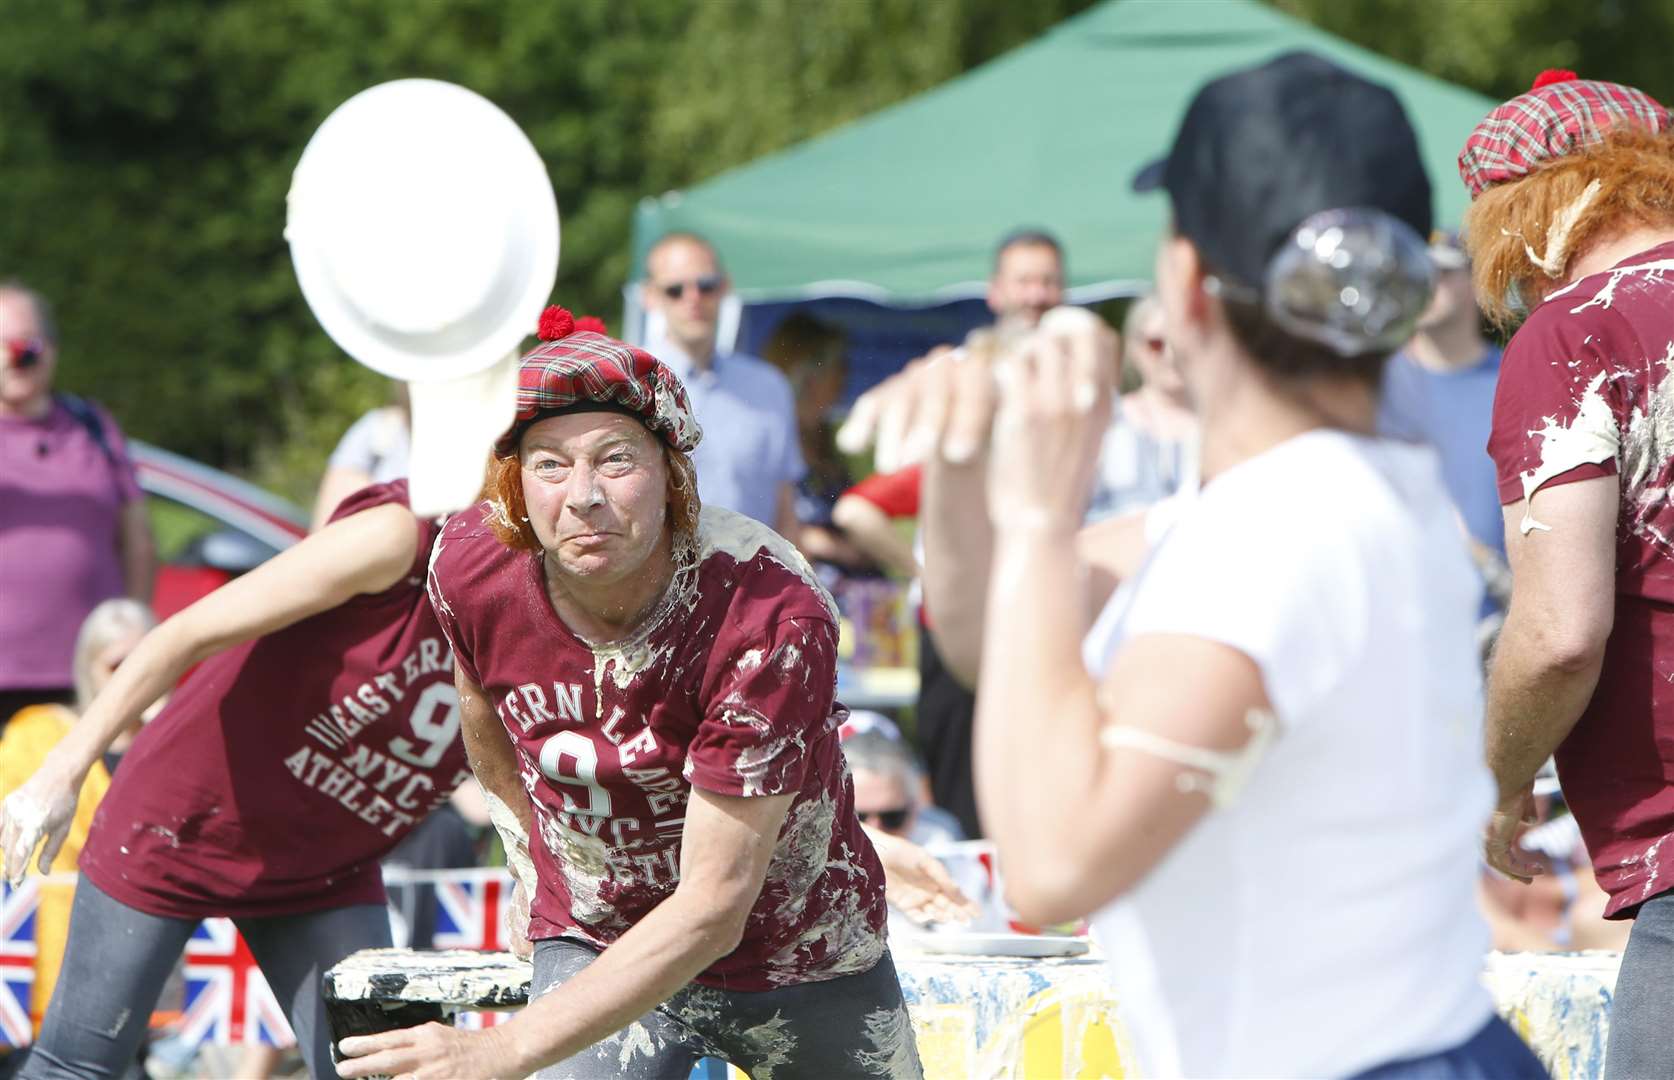 Pies get thrown at the World Custard Pie Championships Picture: Andy Jones